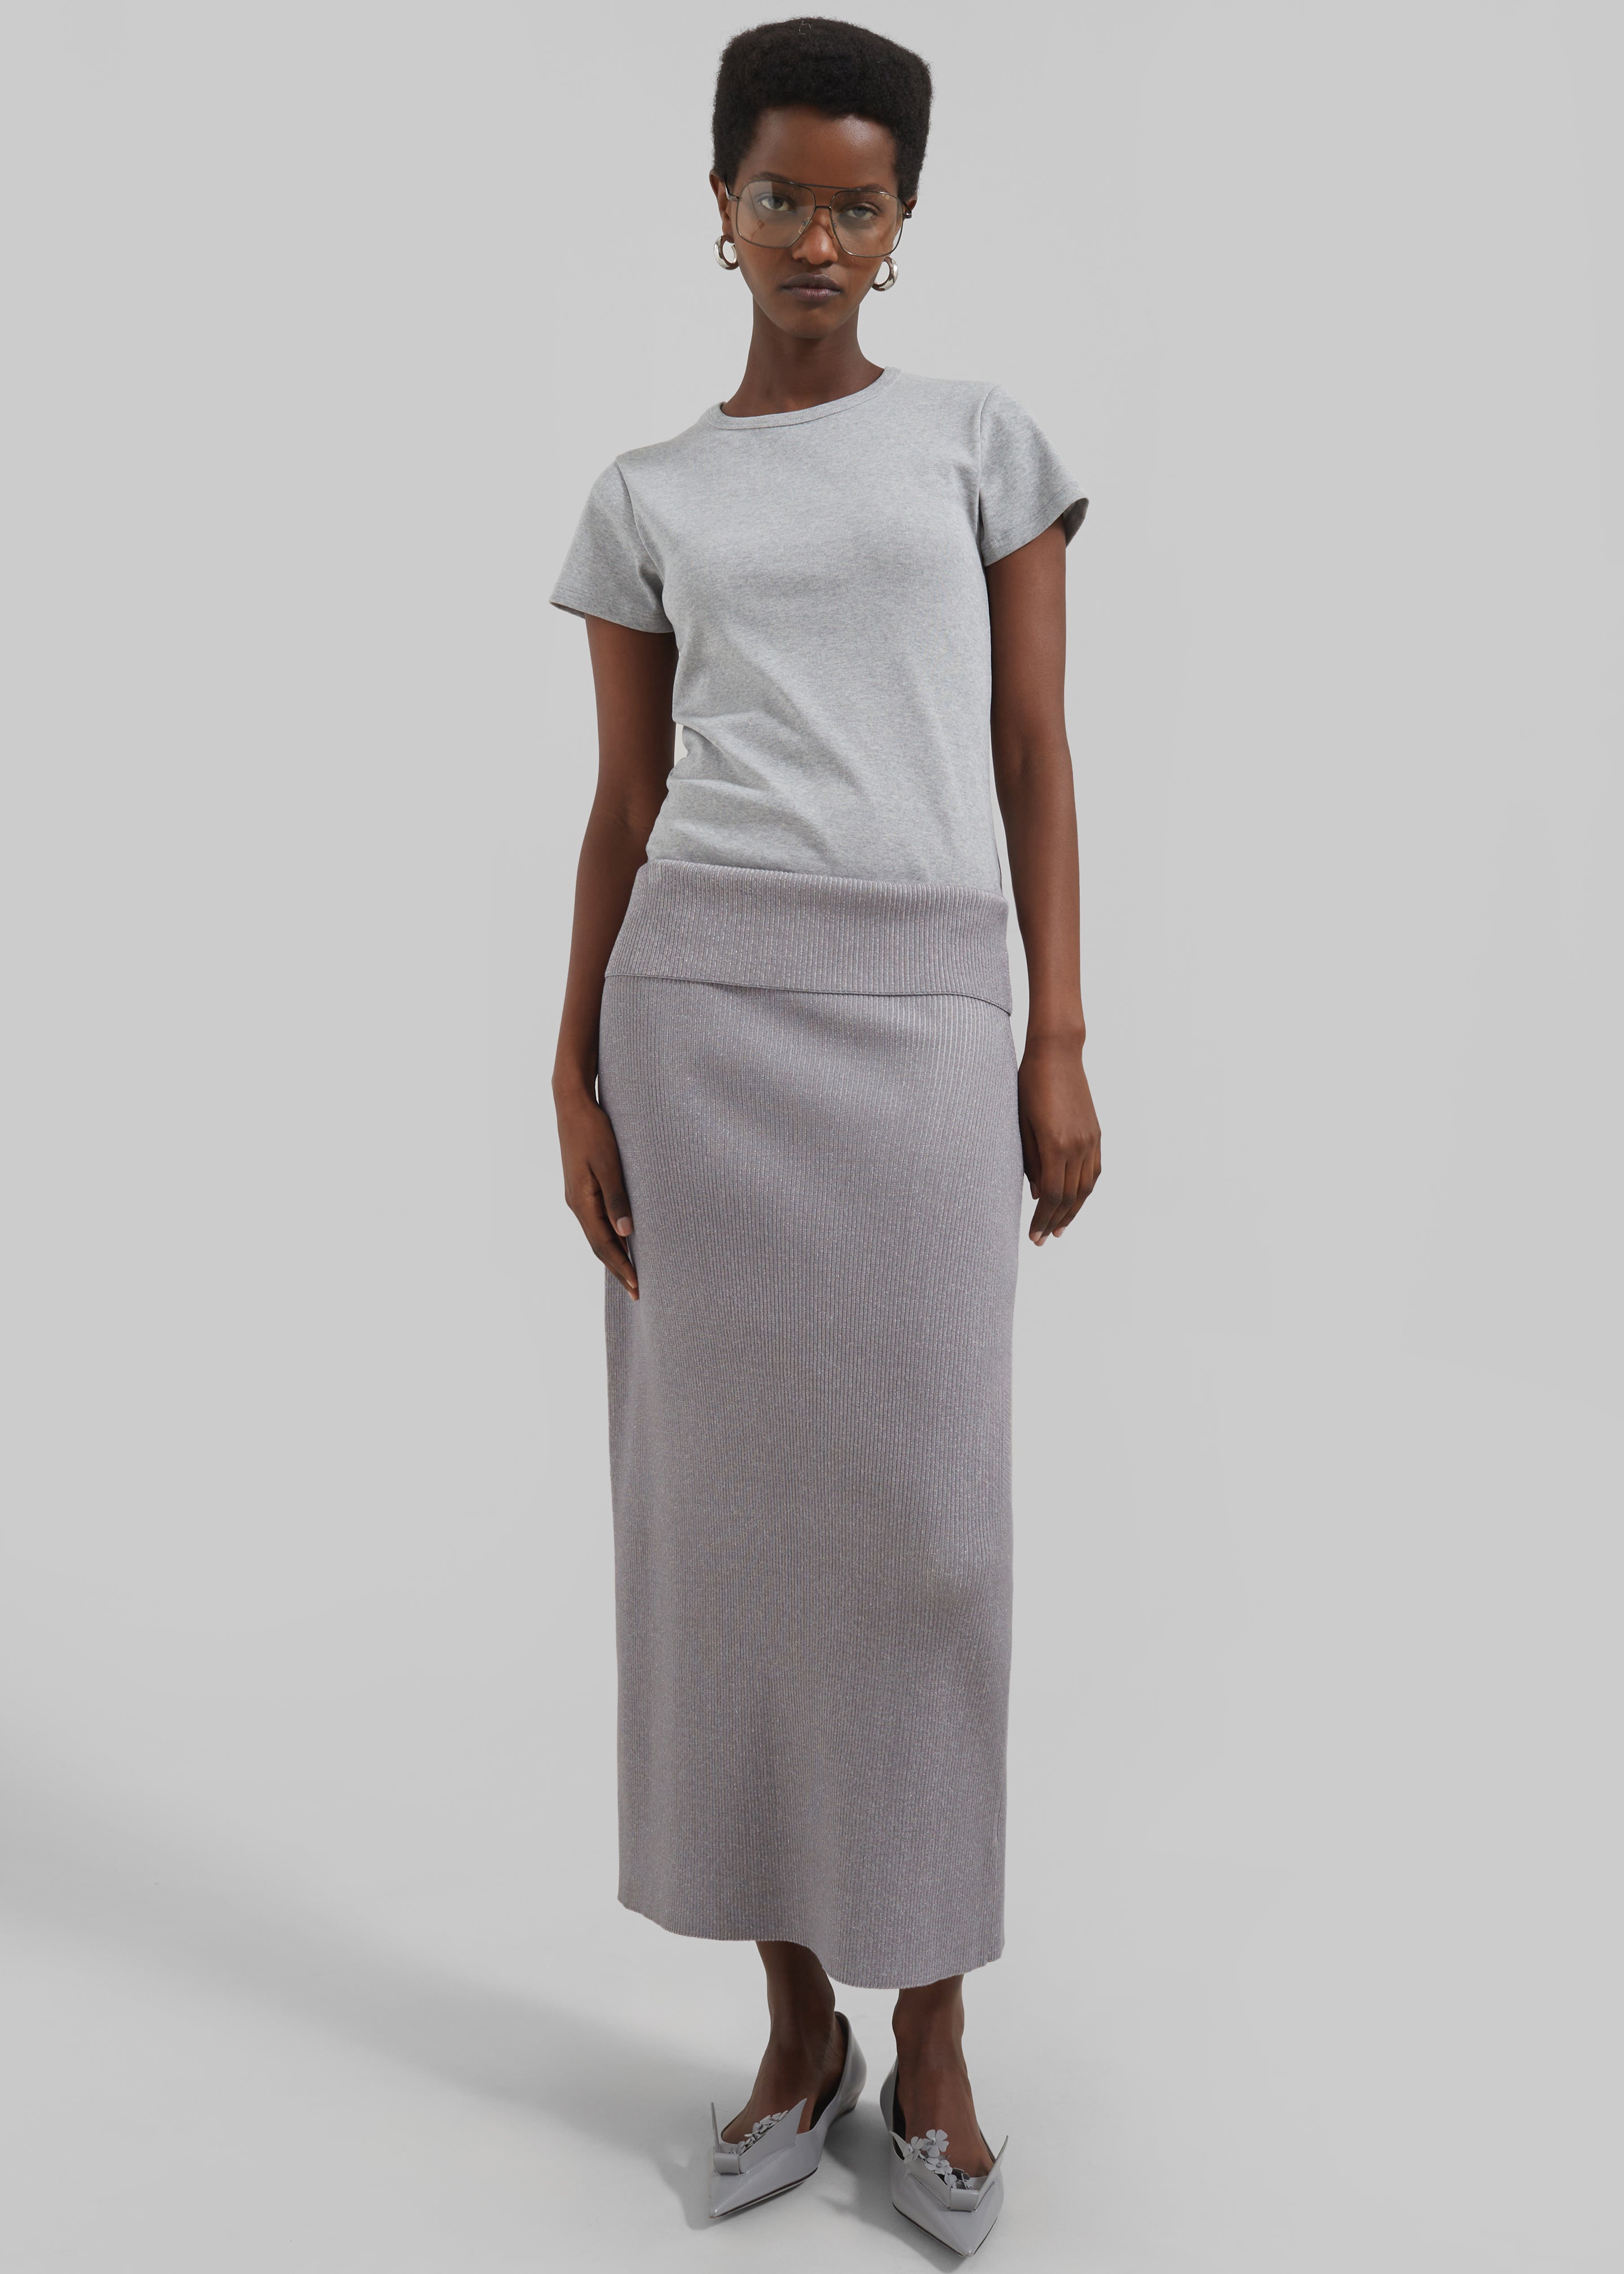 Proenza Schouler White Label Willow Skirt In Plaited Rib Knits - Fog/Off White - 5